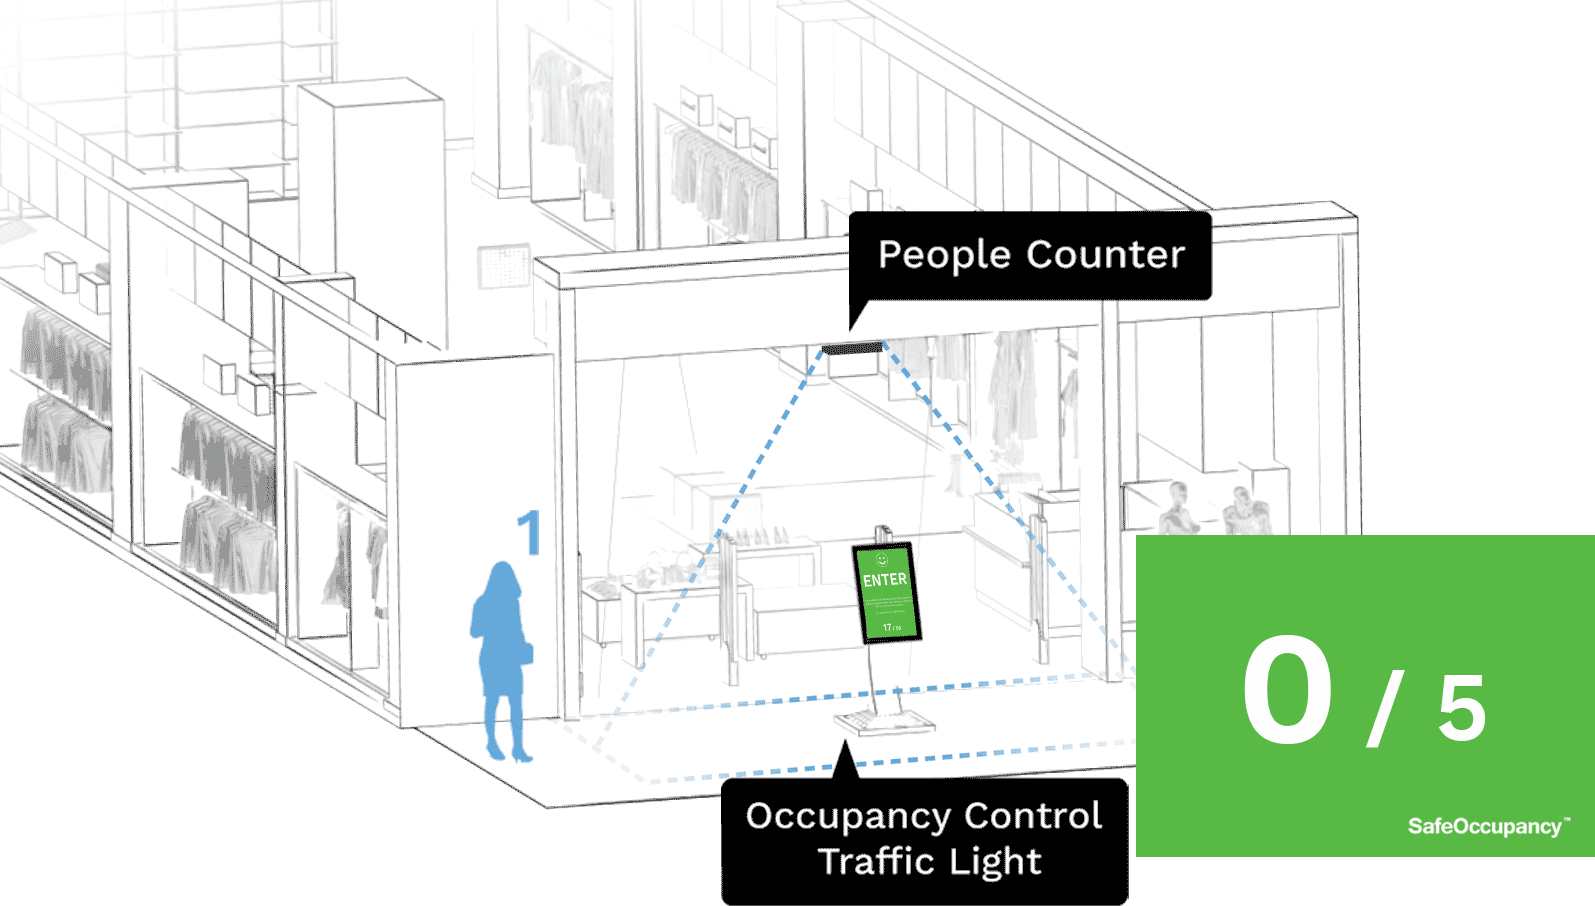 FootfallCam Covid-19 Automated Occupancy Control System - Social Distancing Compliance for Supermarkets with Smart Displays to Control Traffic Flow